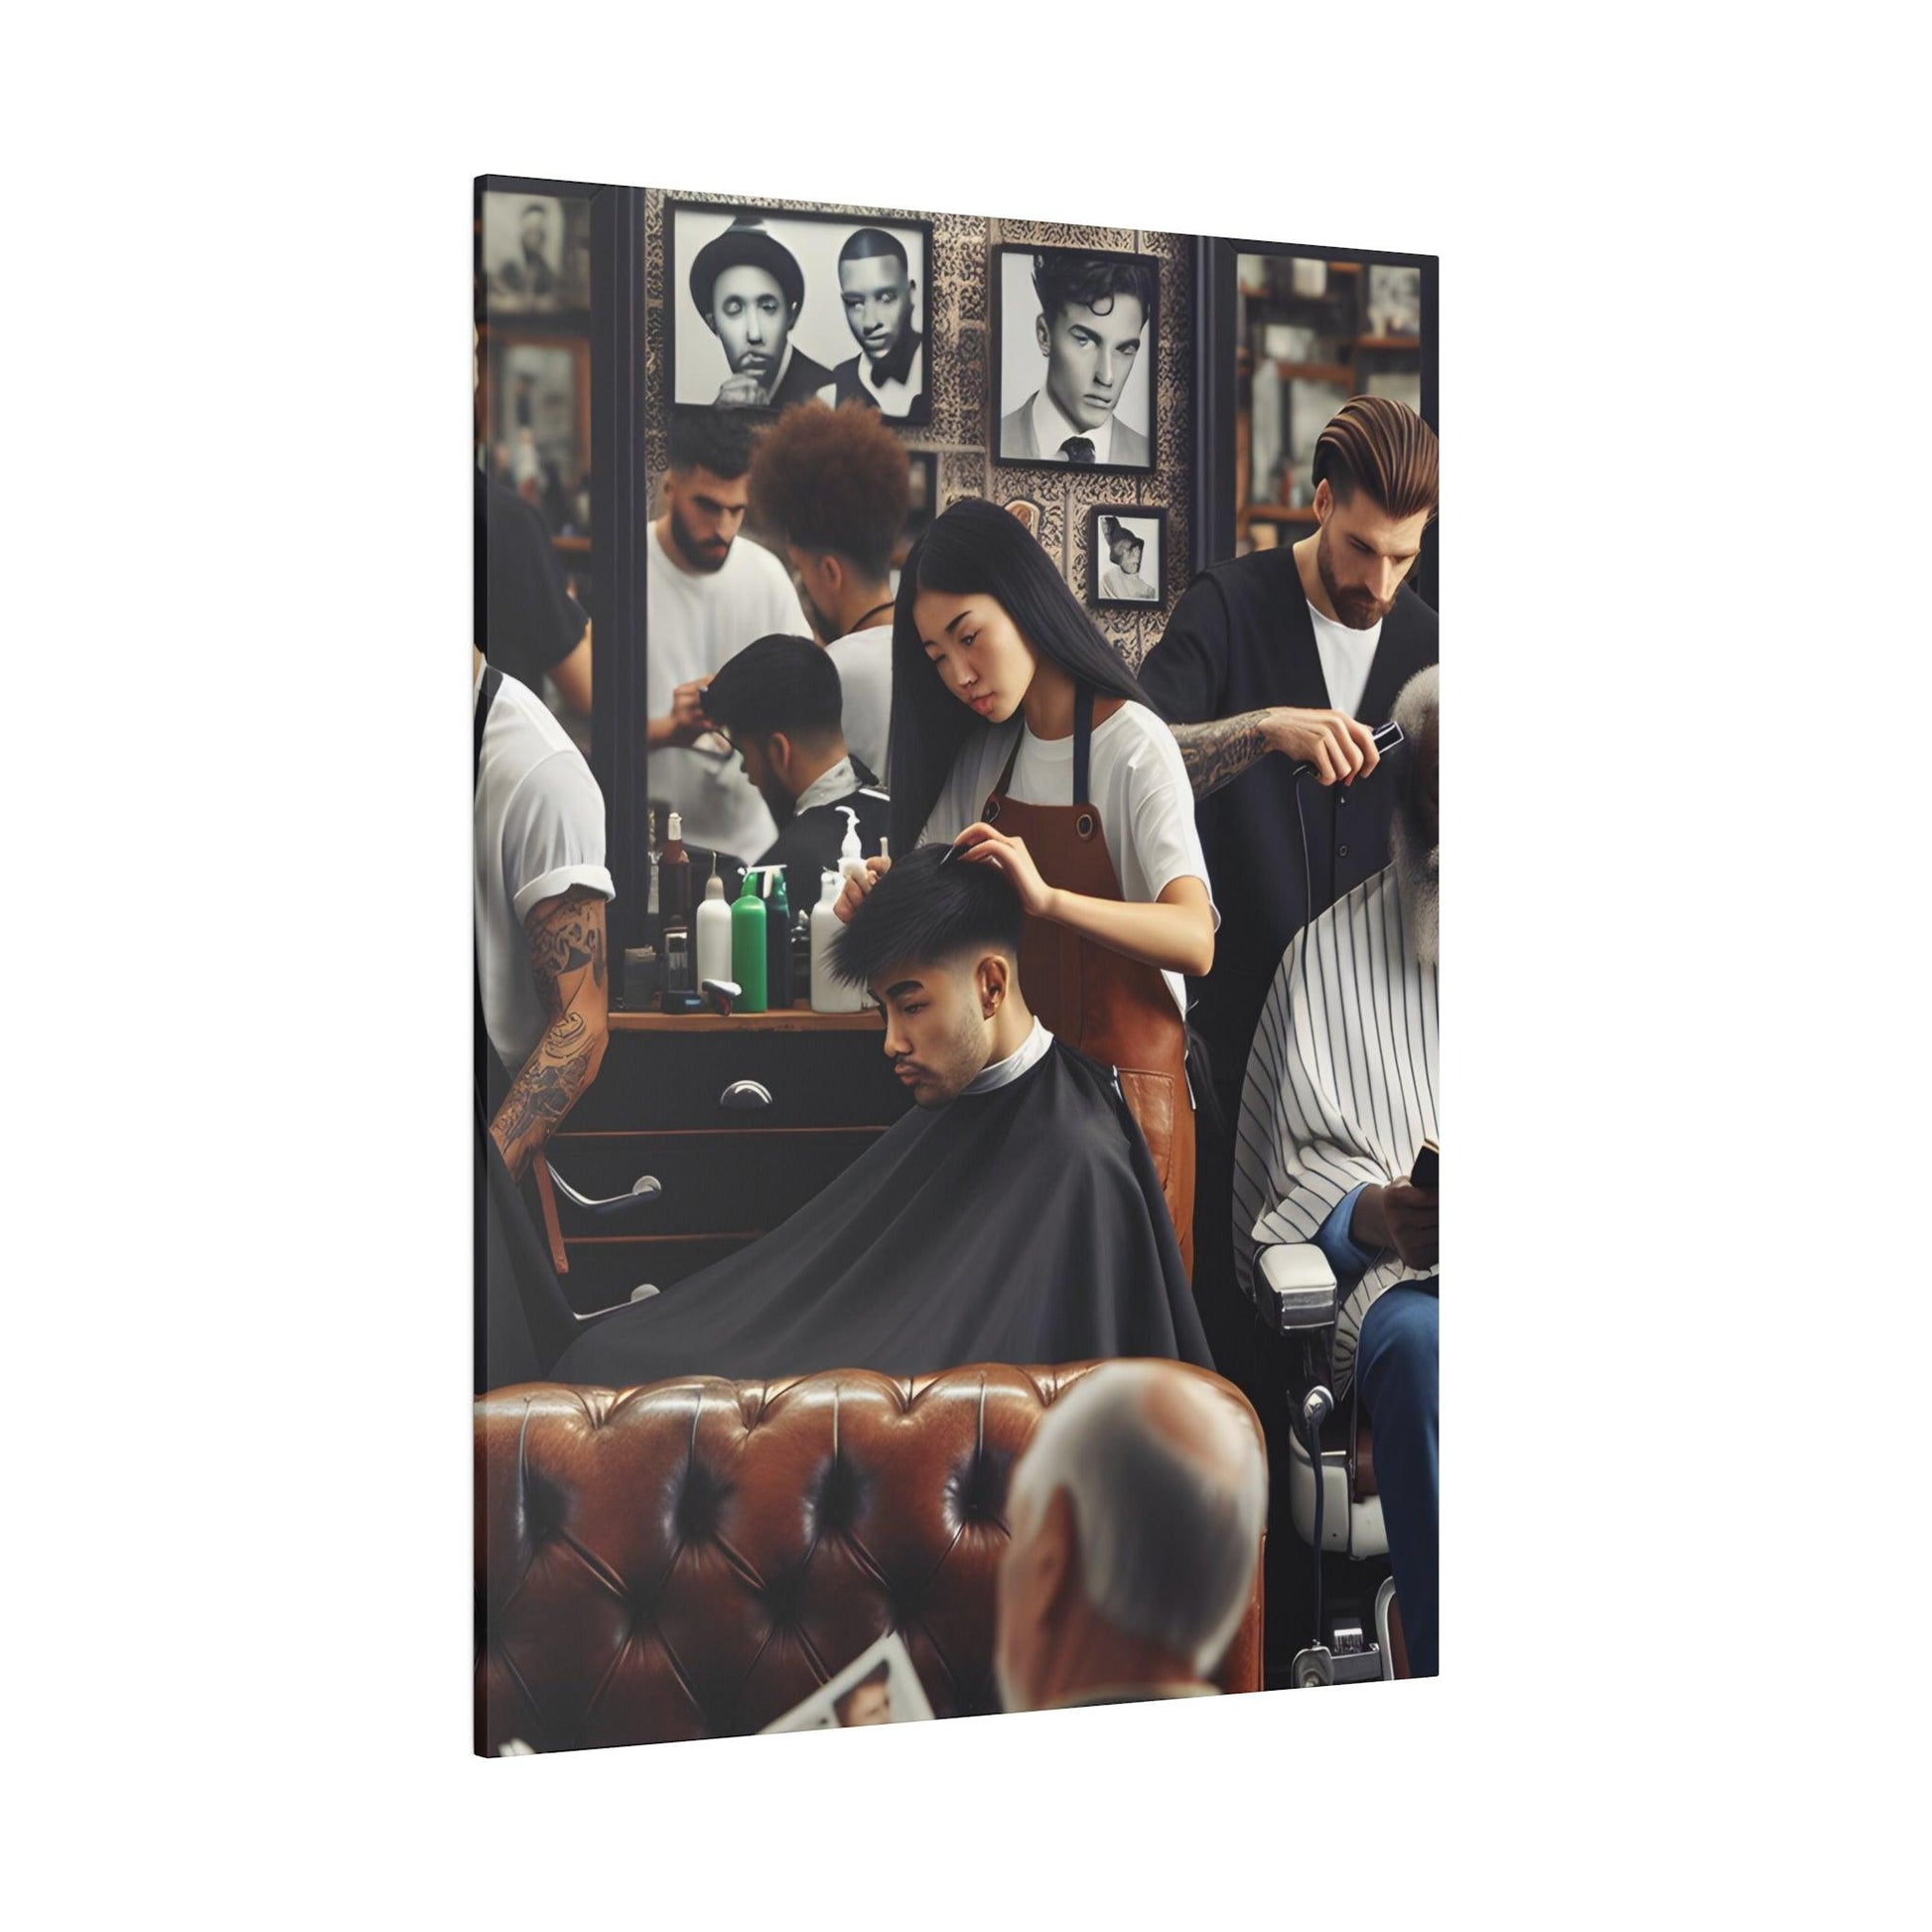 "Clip & Shear Chronicles: Barber Shop Canvas Chronicles" - The Alice Gallery